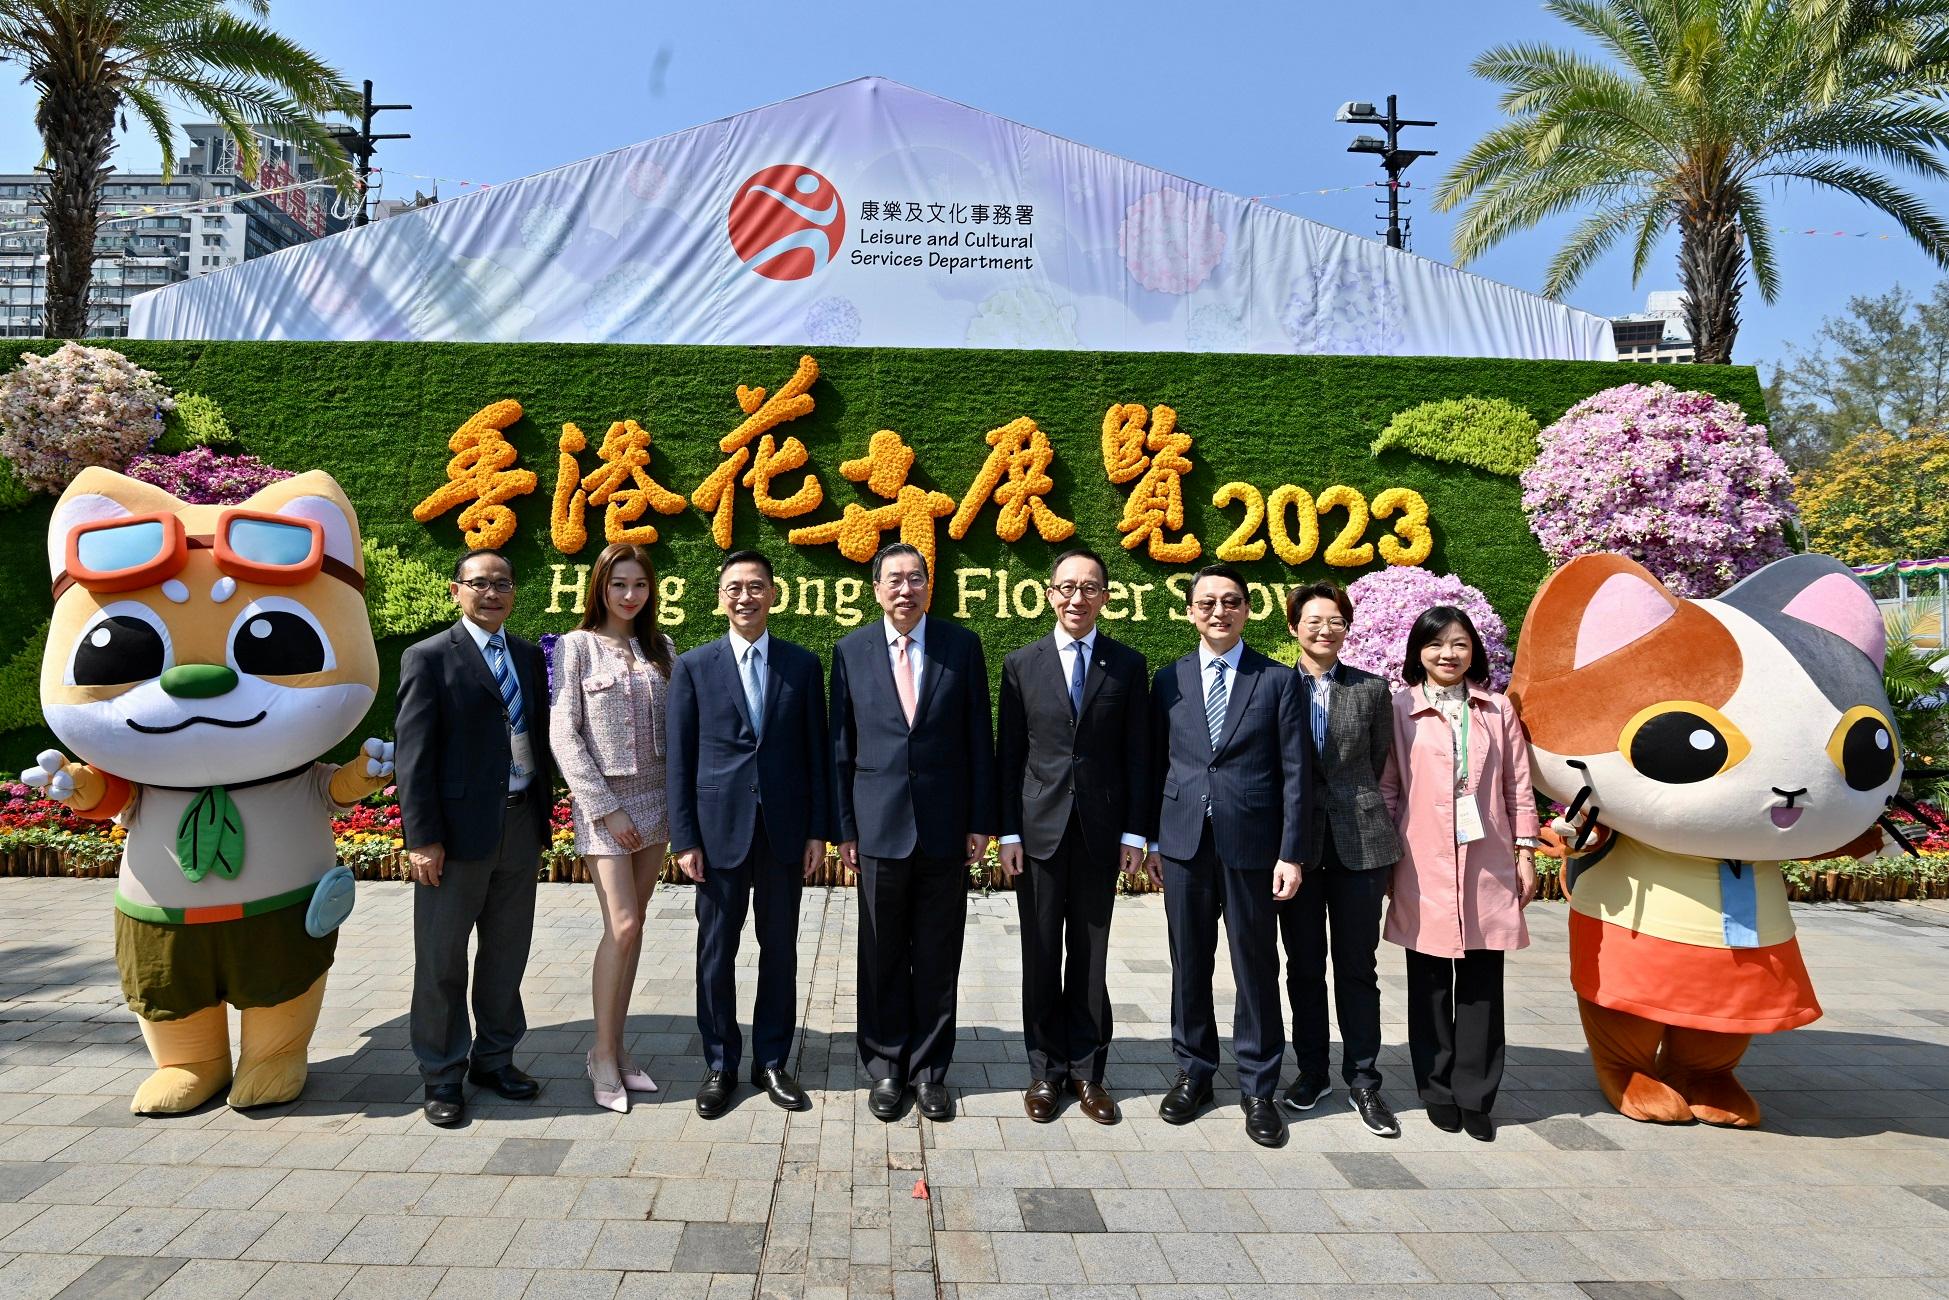 The annual spectacular Hong Kong Flower Show opened at Victoria Park today (March 10) with some 400 000 flowers on display, including about 40 000 hydrangeas as the theme flower. Photo shows (from left) Assistant Director (Leisure Services) of the Leisure and Cultural Services Department (LCSD) Mr Luk Chi-kwong; the champion of Miss Hong Kong 2022, Denice Lam; the Secretary for Culture, Sports and Tourism, Mr Kevin Yeung; the President of the Legislative Council, Mr Andrew Leung; the Executive Director, Charities and Community of the Hong Kong Jockey Club, Dr Gabriel Leung; the Director of Leisure and Cultural Services, Mr Vincent Liu; the Deputy Director (Leisure Services) of the LCSD, Ms Winnie Chui; and the Chairperson of the Show Committee of Flower Show, Ms Tina Tai, in front of the colourful three-dimensional hydrangea flower wall.